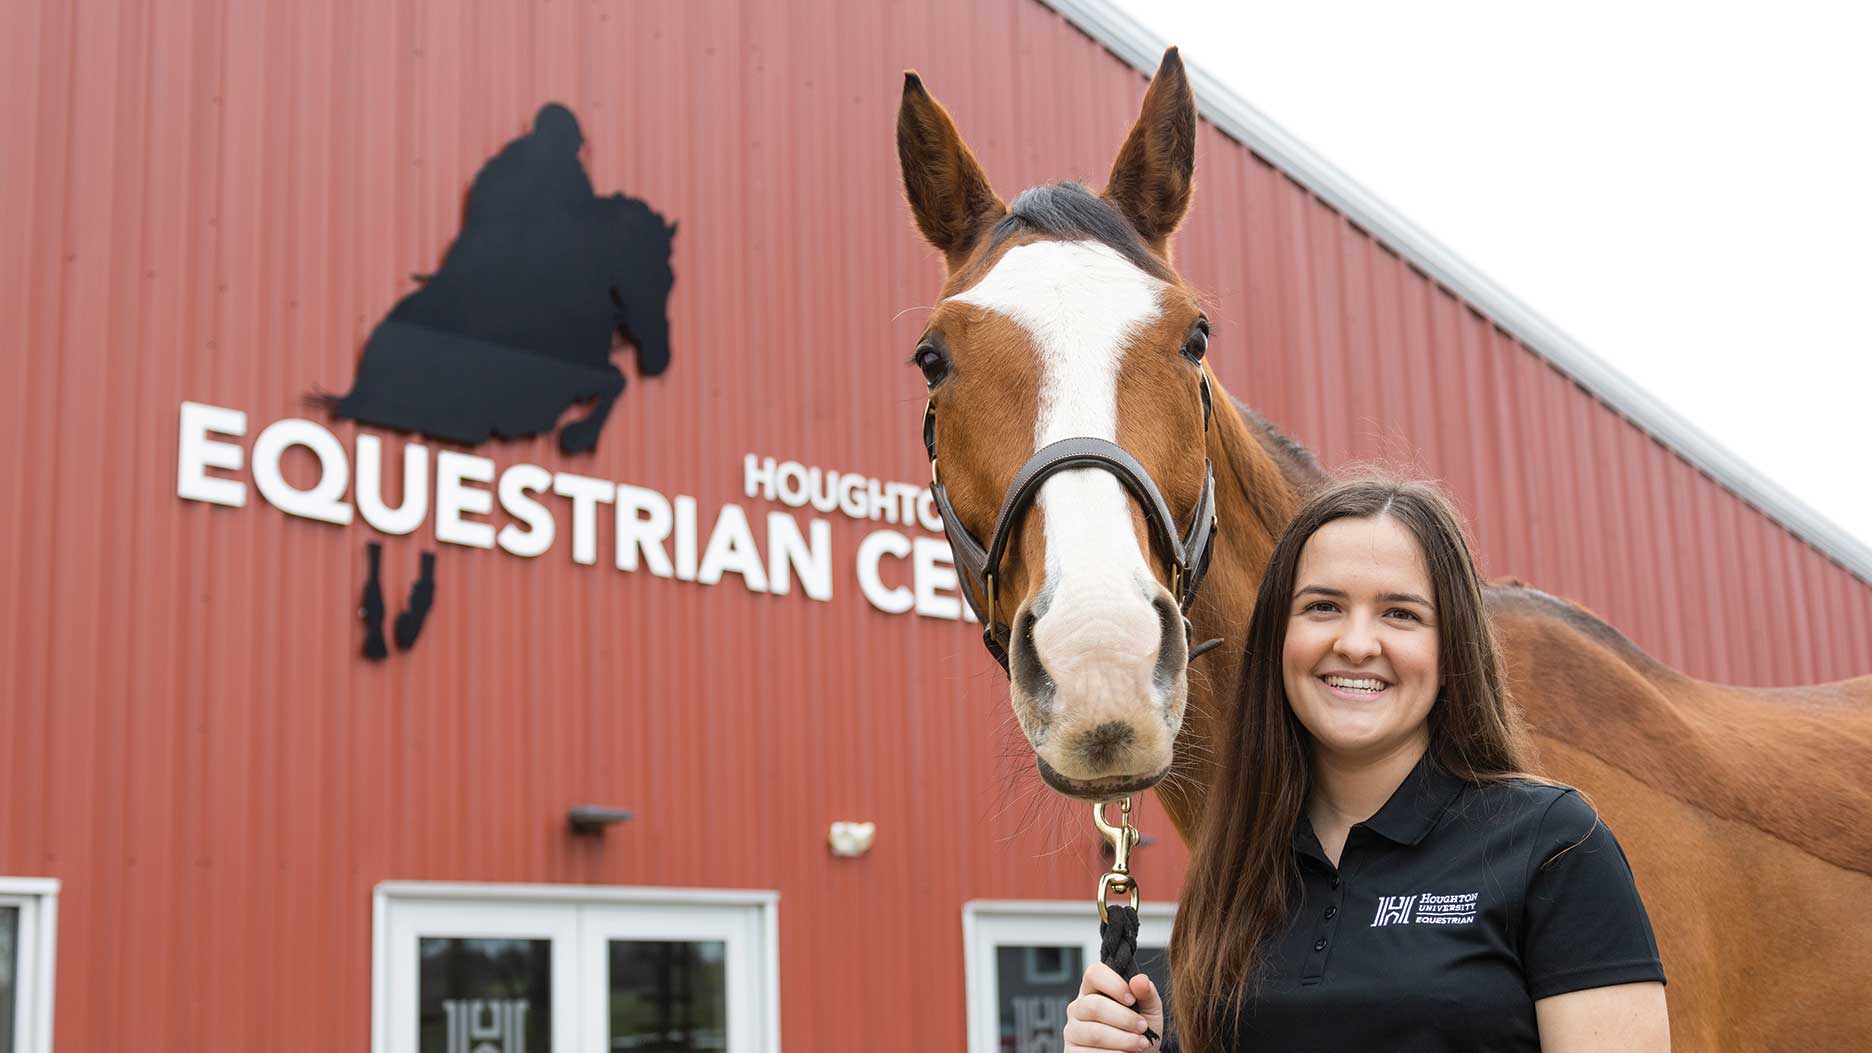 Houghton equestrian student Cassidy Kuhlman standing with her horse in front of the Equestrian Center.